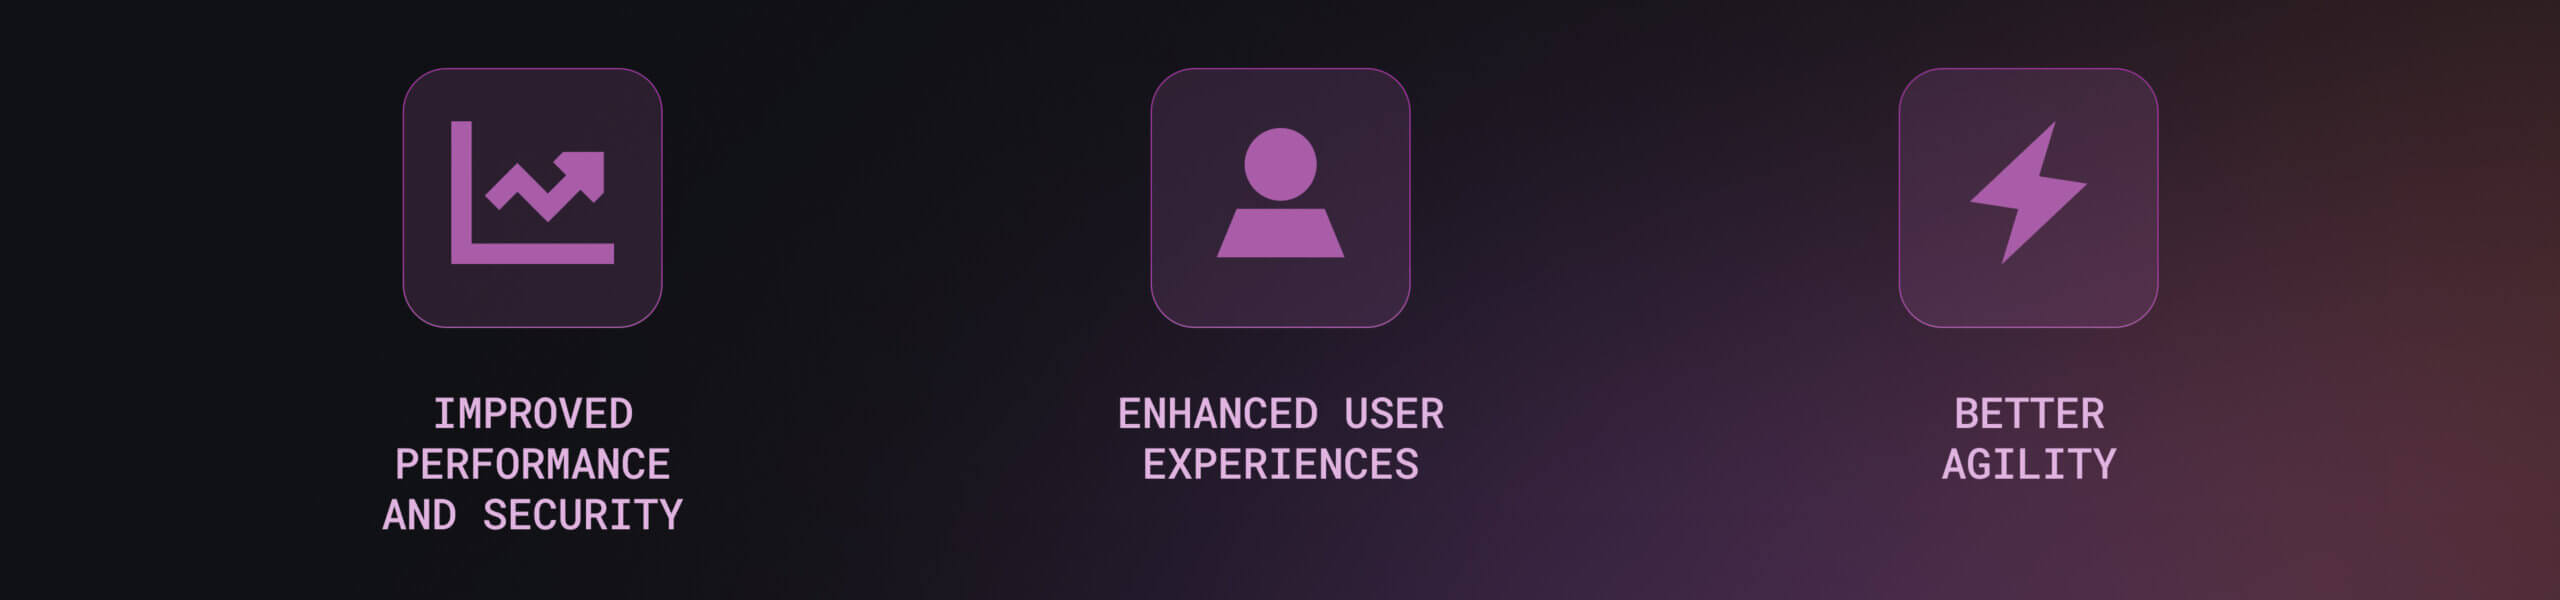 Icons to the headers below: Improved performance, enhanced user experiences, and better agility